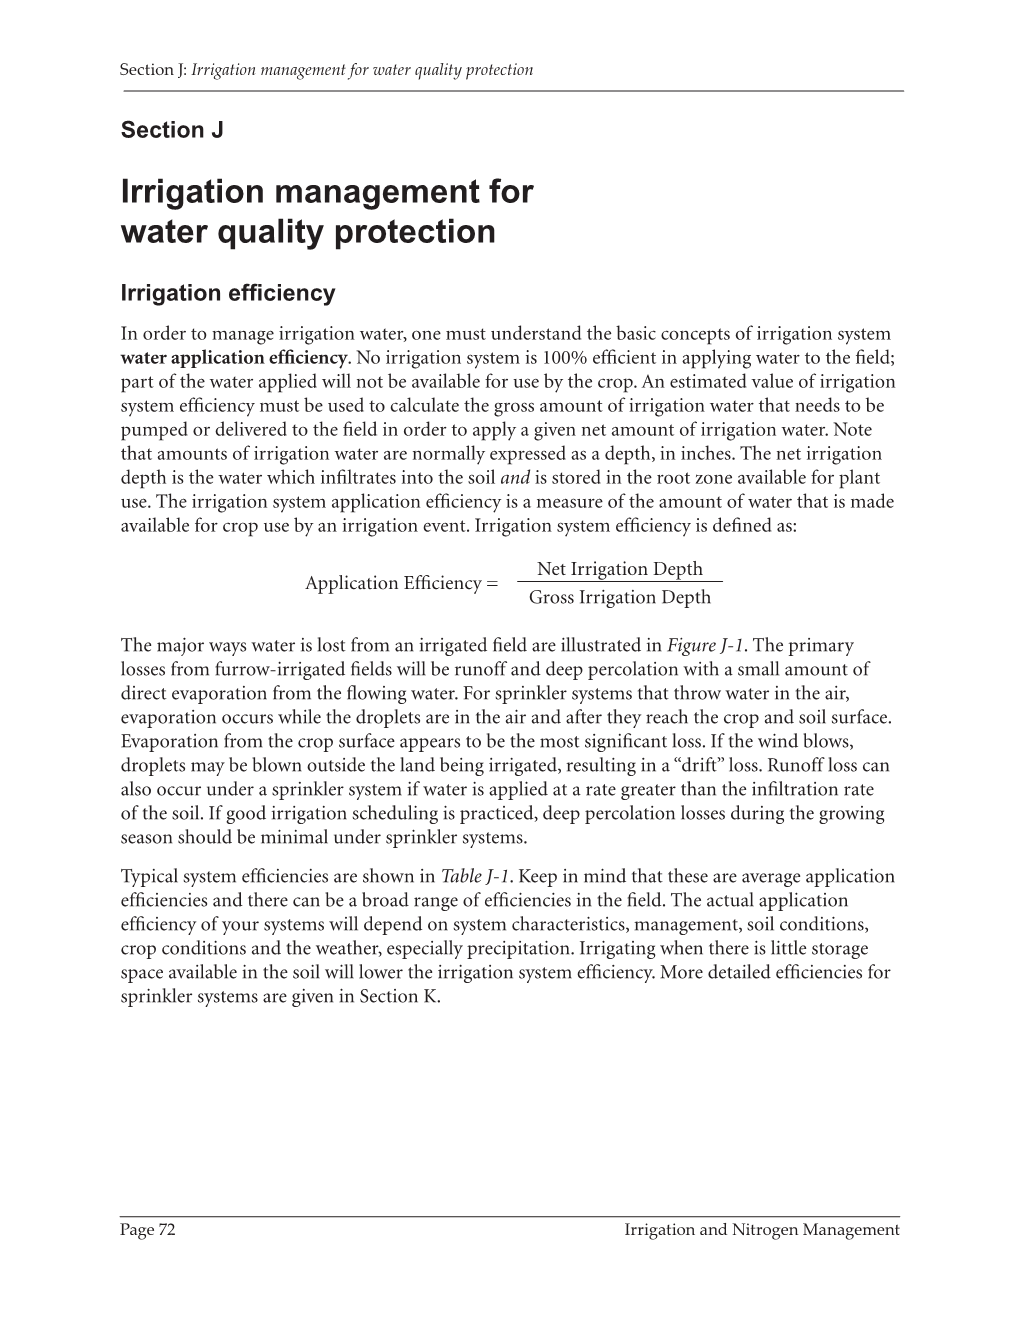 Irrigation Management for Water Quality Protection